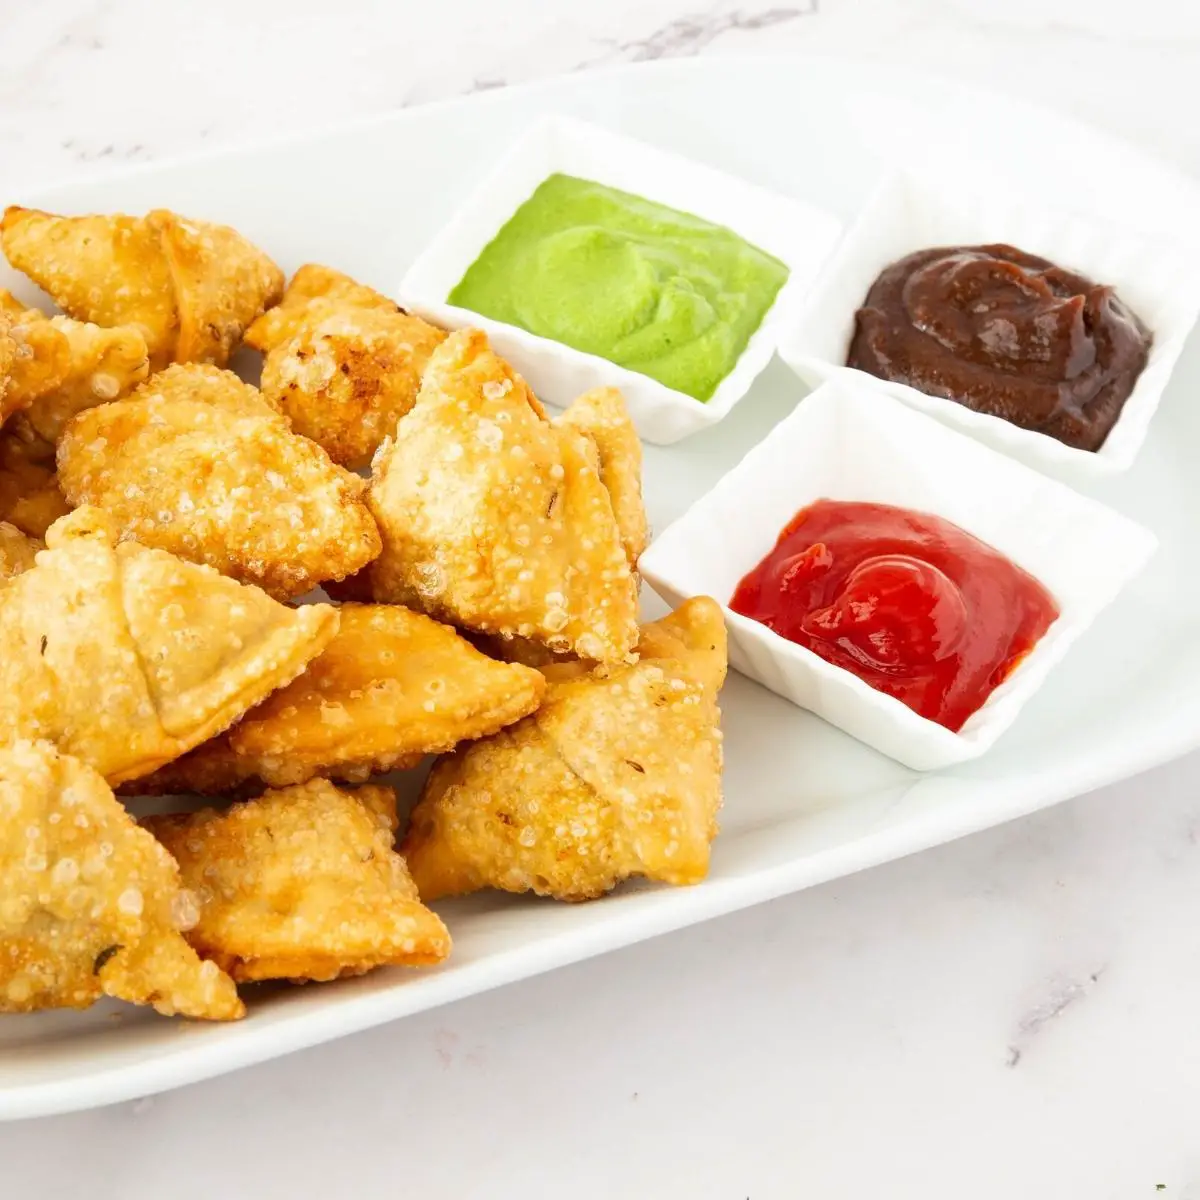 Samosa with sauces on a white plate.